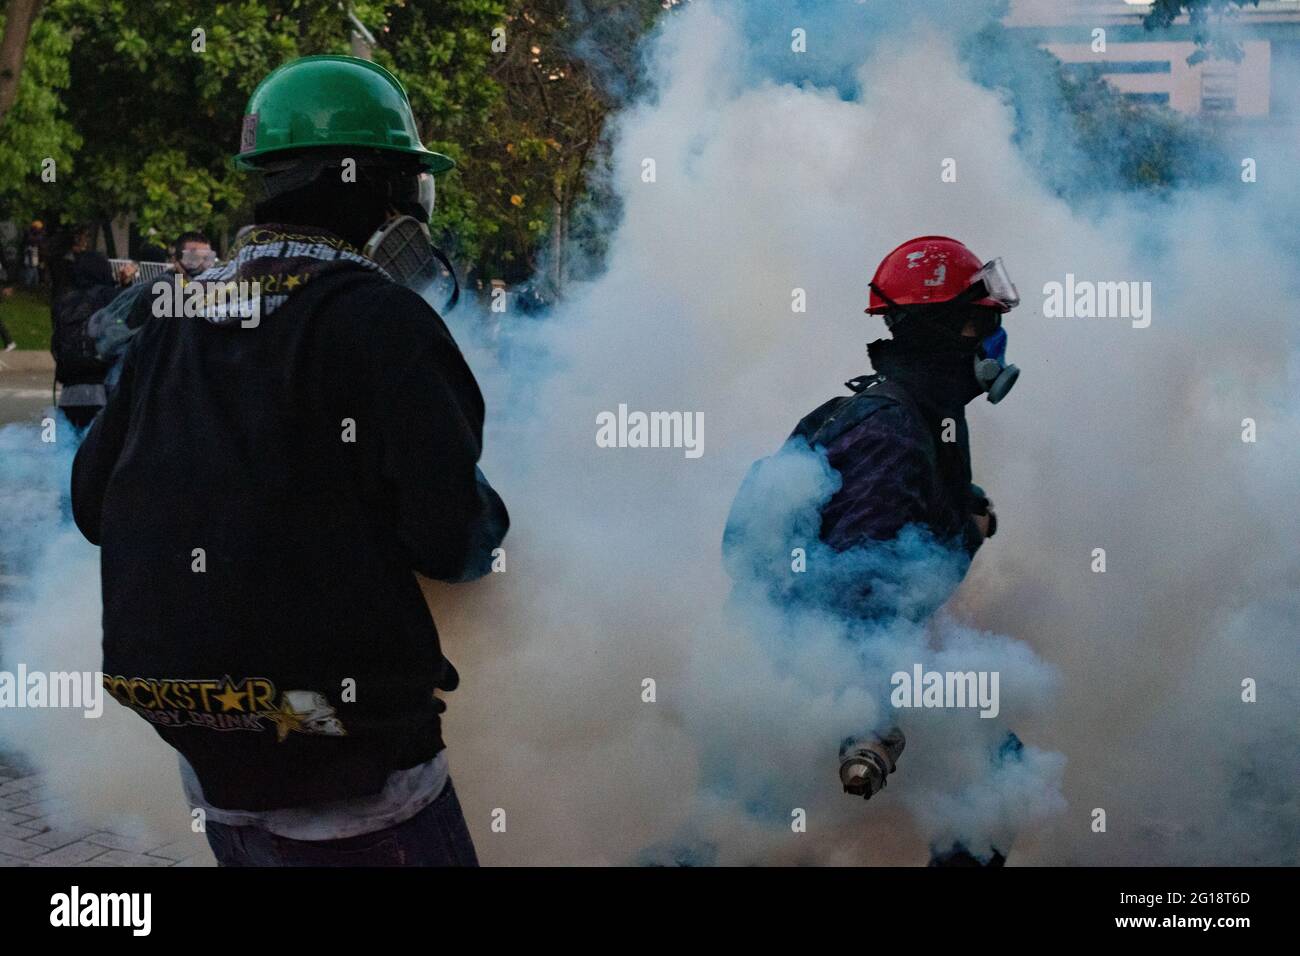 Demonstrators retun and mitigate tear gas as clashes between demonstrators and Colombia's riot police (ESMAD) erupt in Medellín, Colombia after several weeks of anti-government protest against President Ivan Duque's tax and health reforms and unrest and abuse of authority cases that leave at least 70 dead according to NGOs on June 4, 2021. Stock Photo